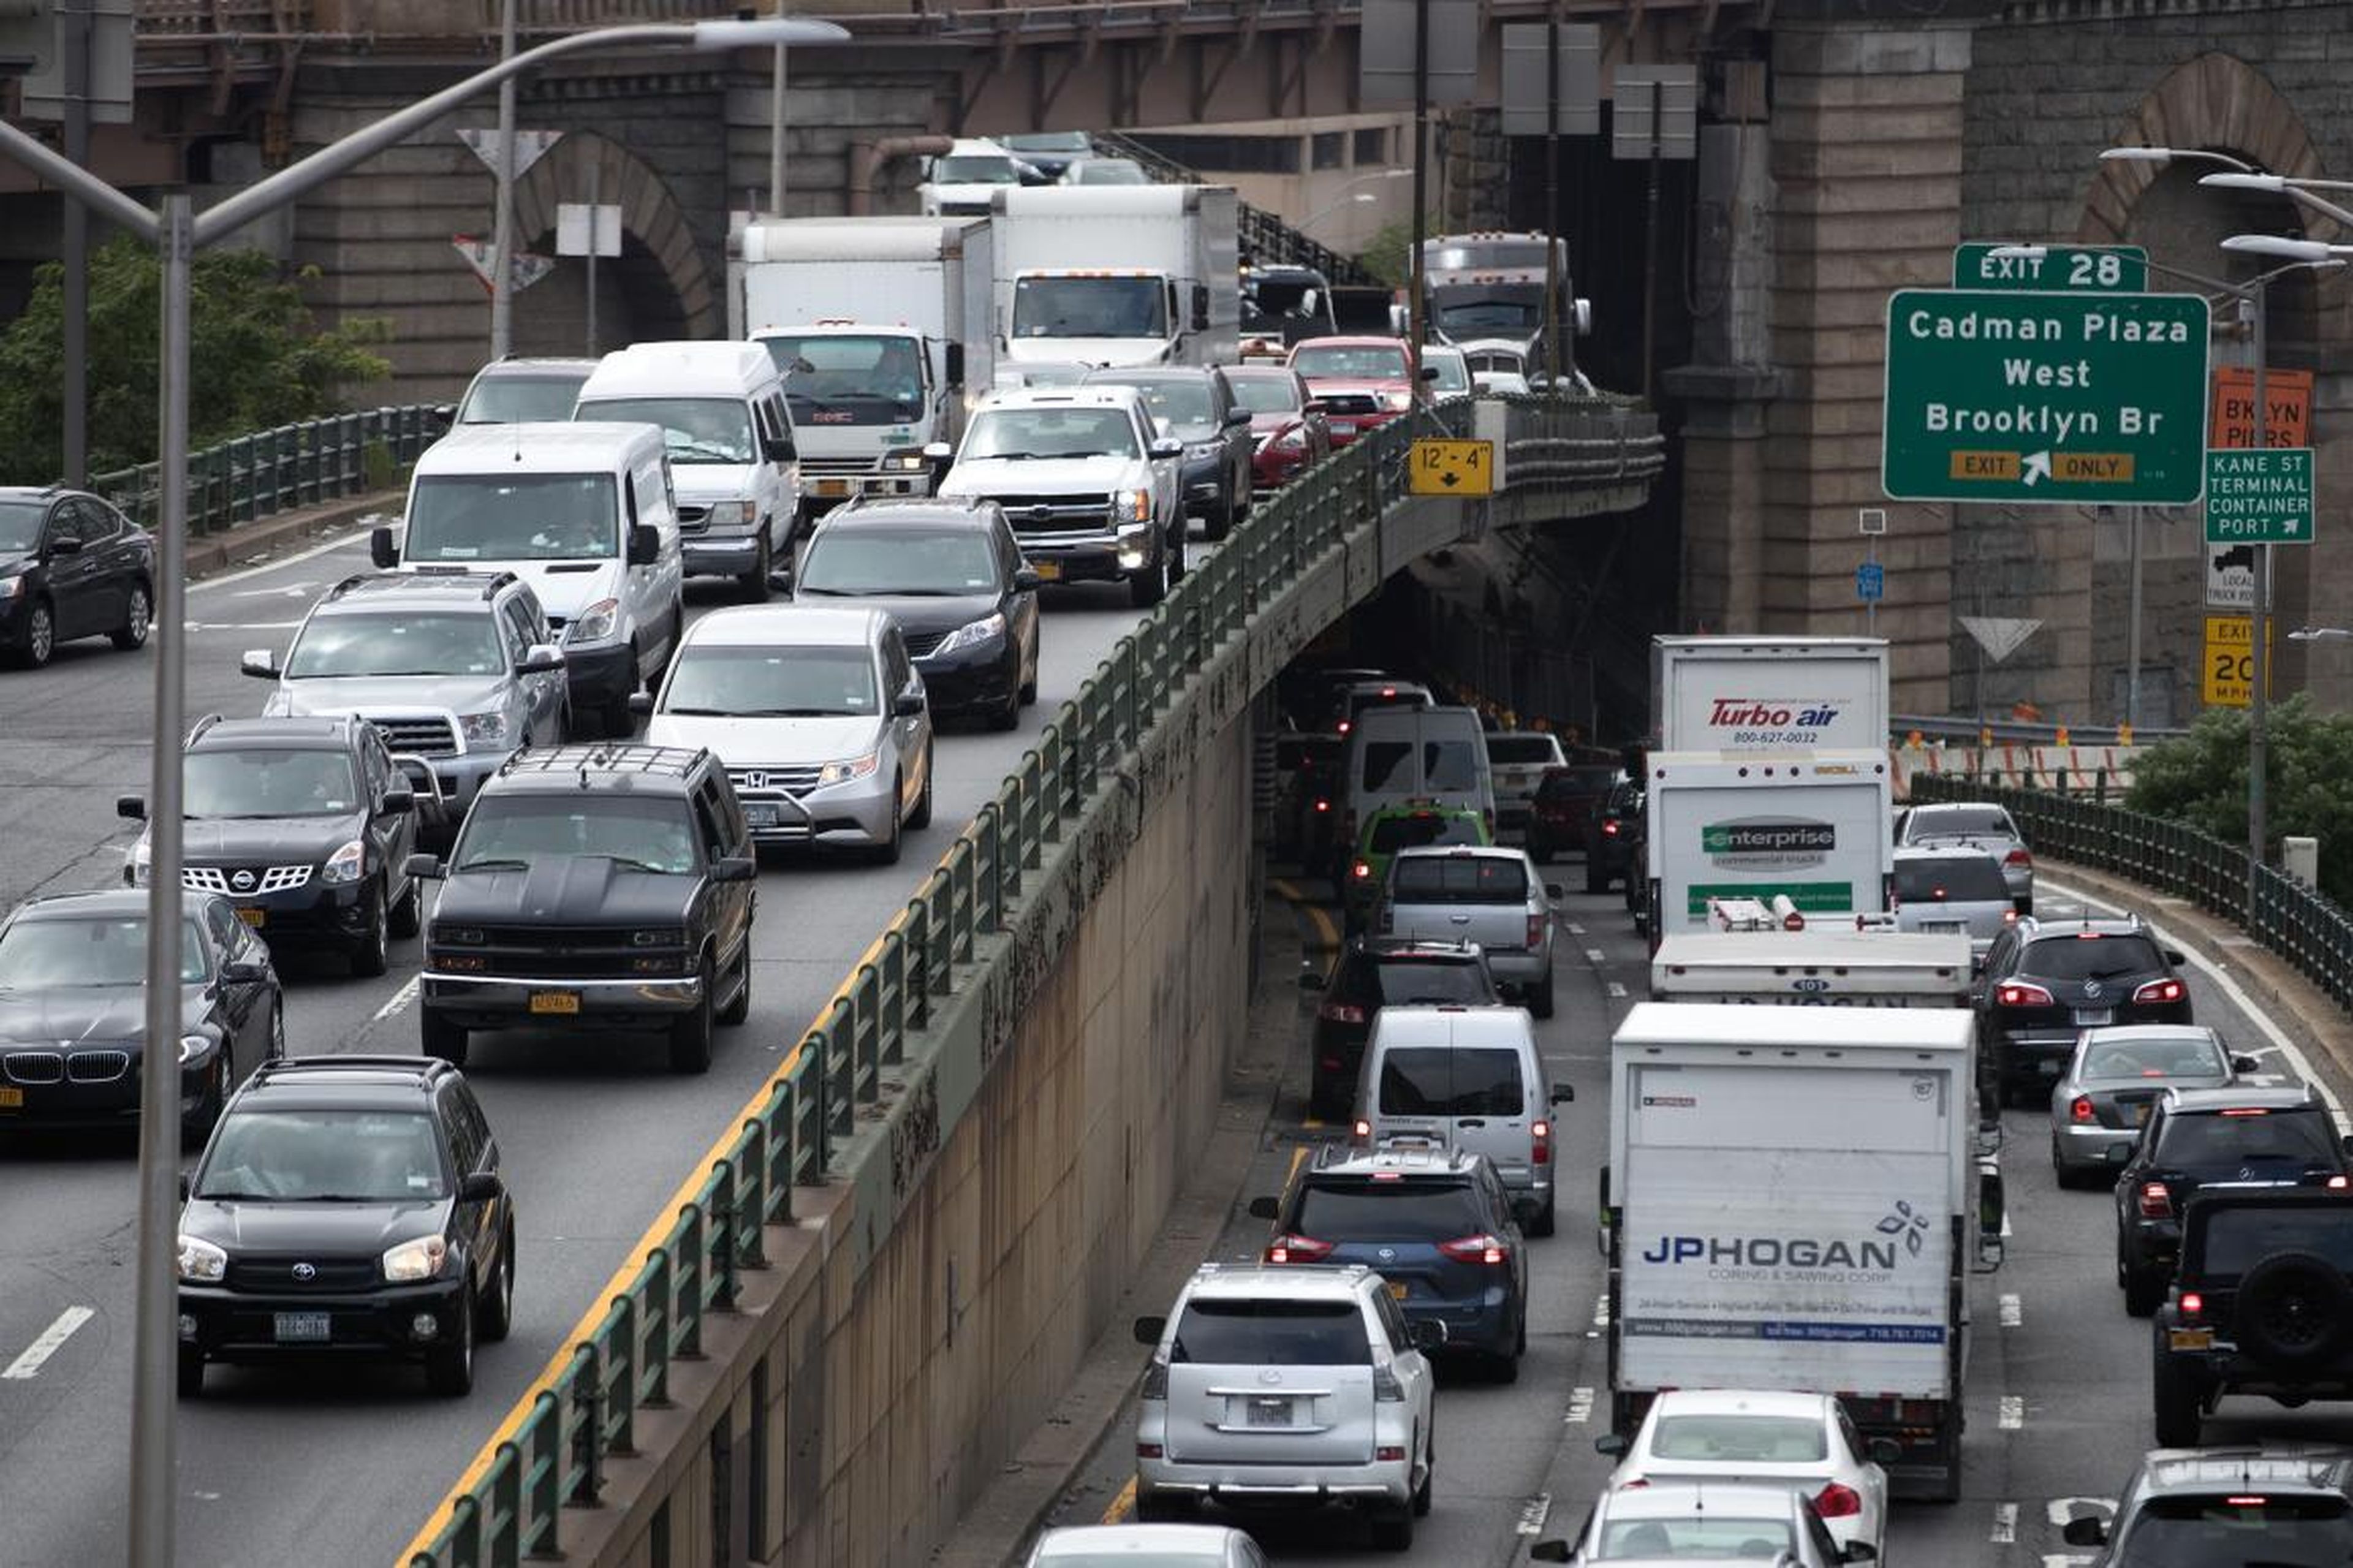 Each New York commuter spends an average of 91 hours a year stuck in traffic.